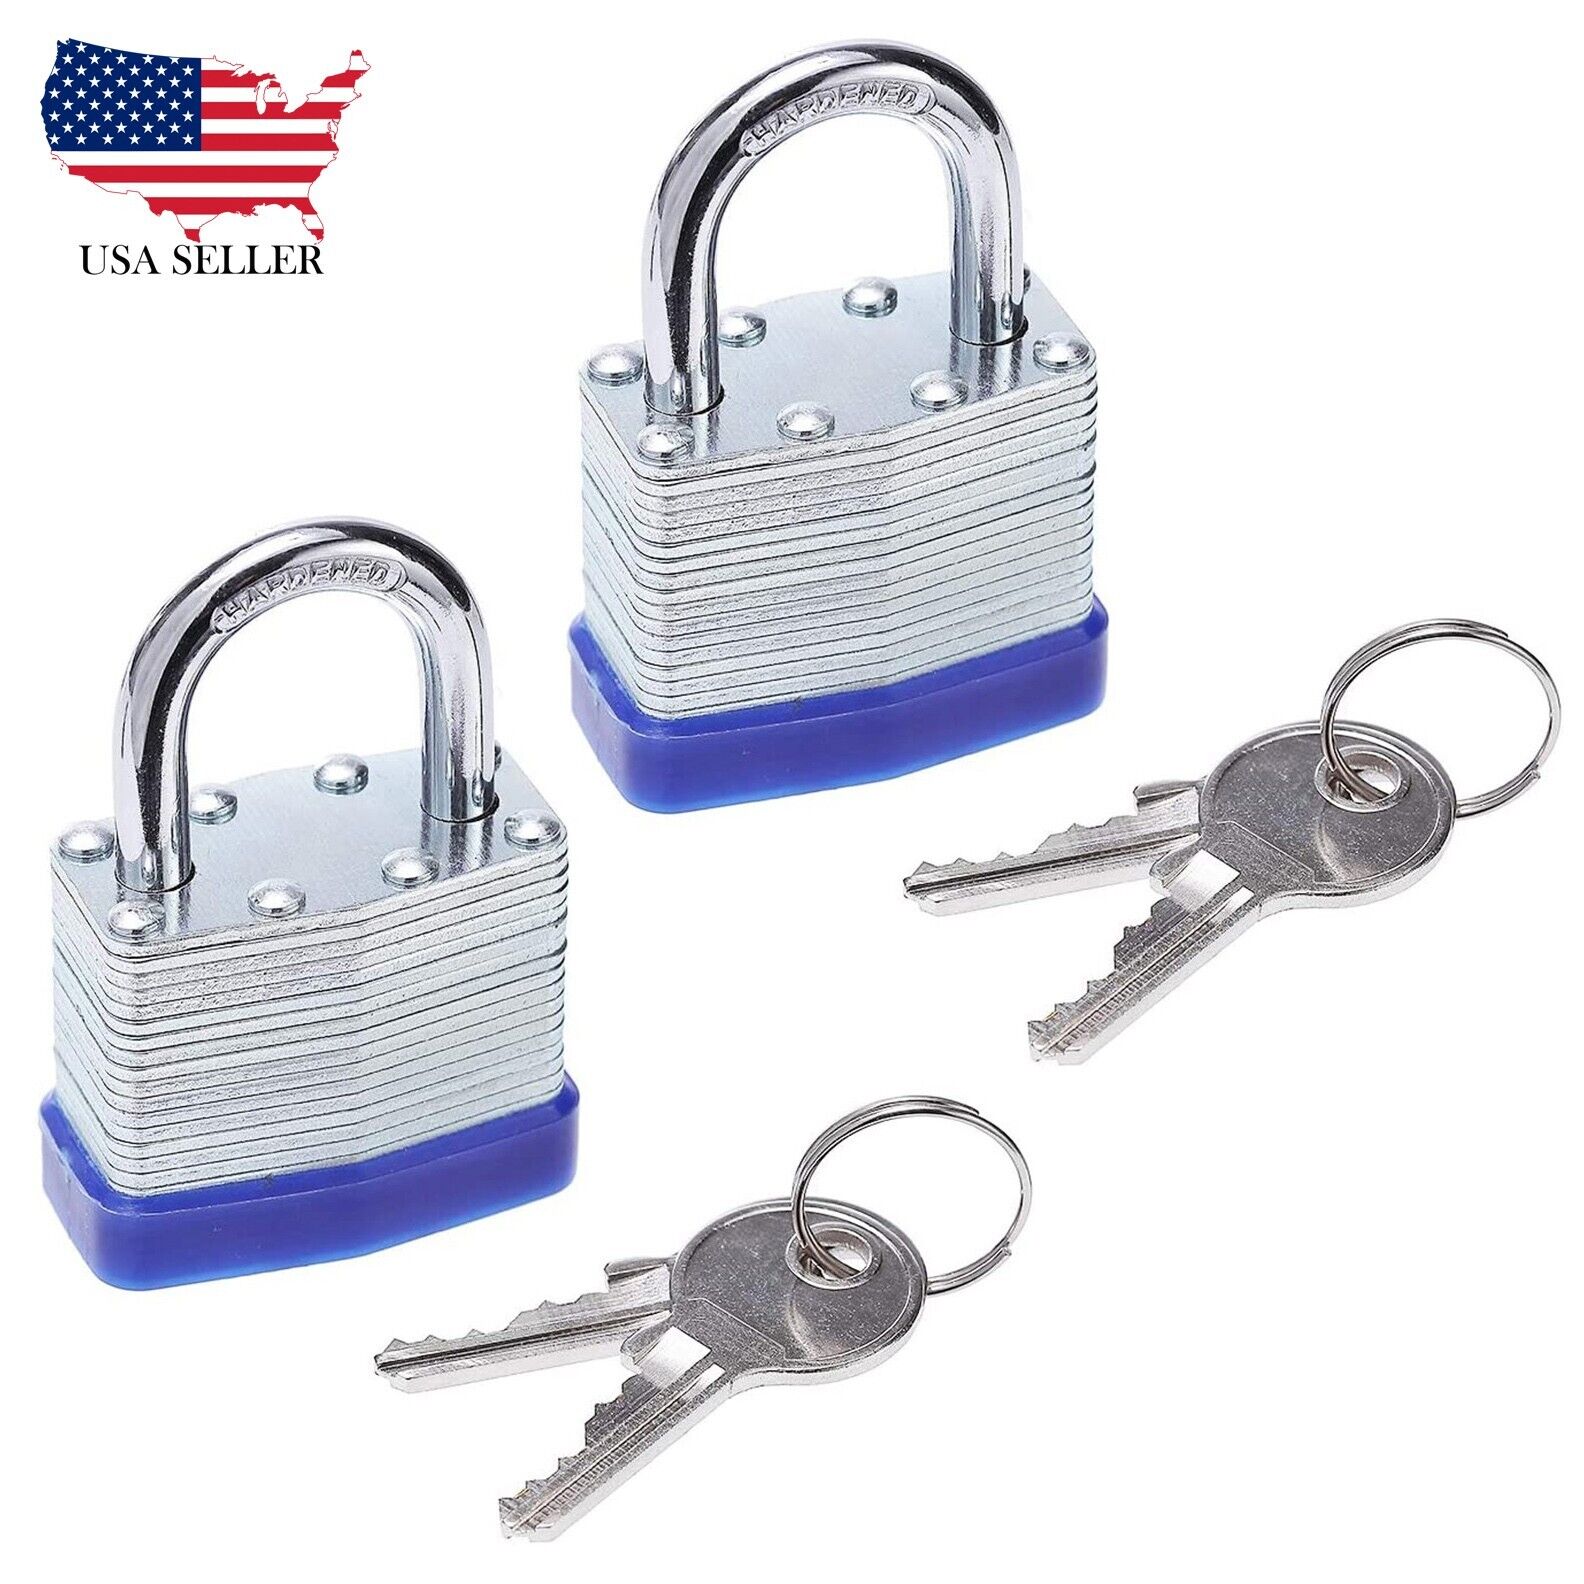 Laminated Steel Padlock with Key, Lock 1-1/4 in Wide Lock Body, Fence, 2 Pack